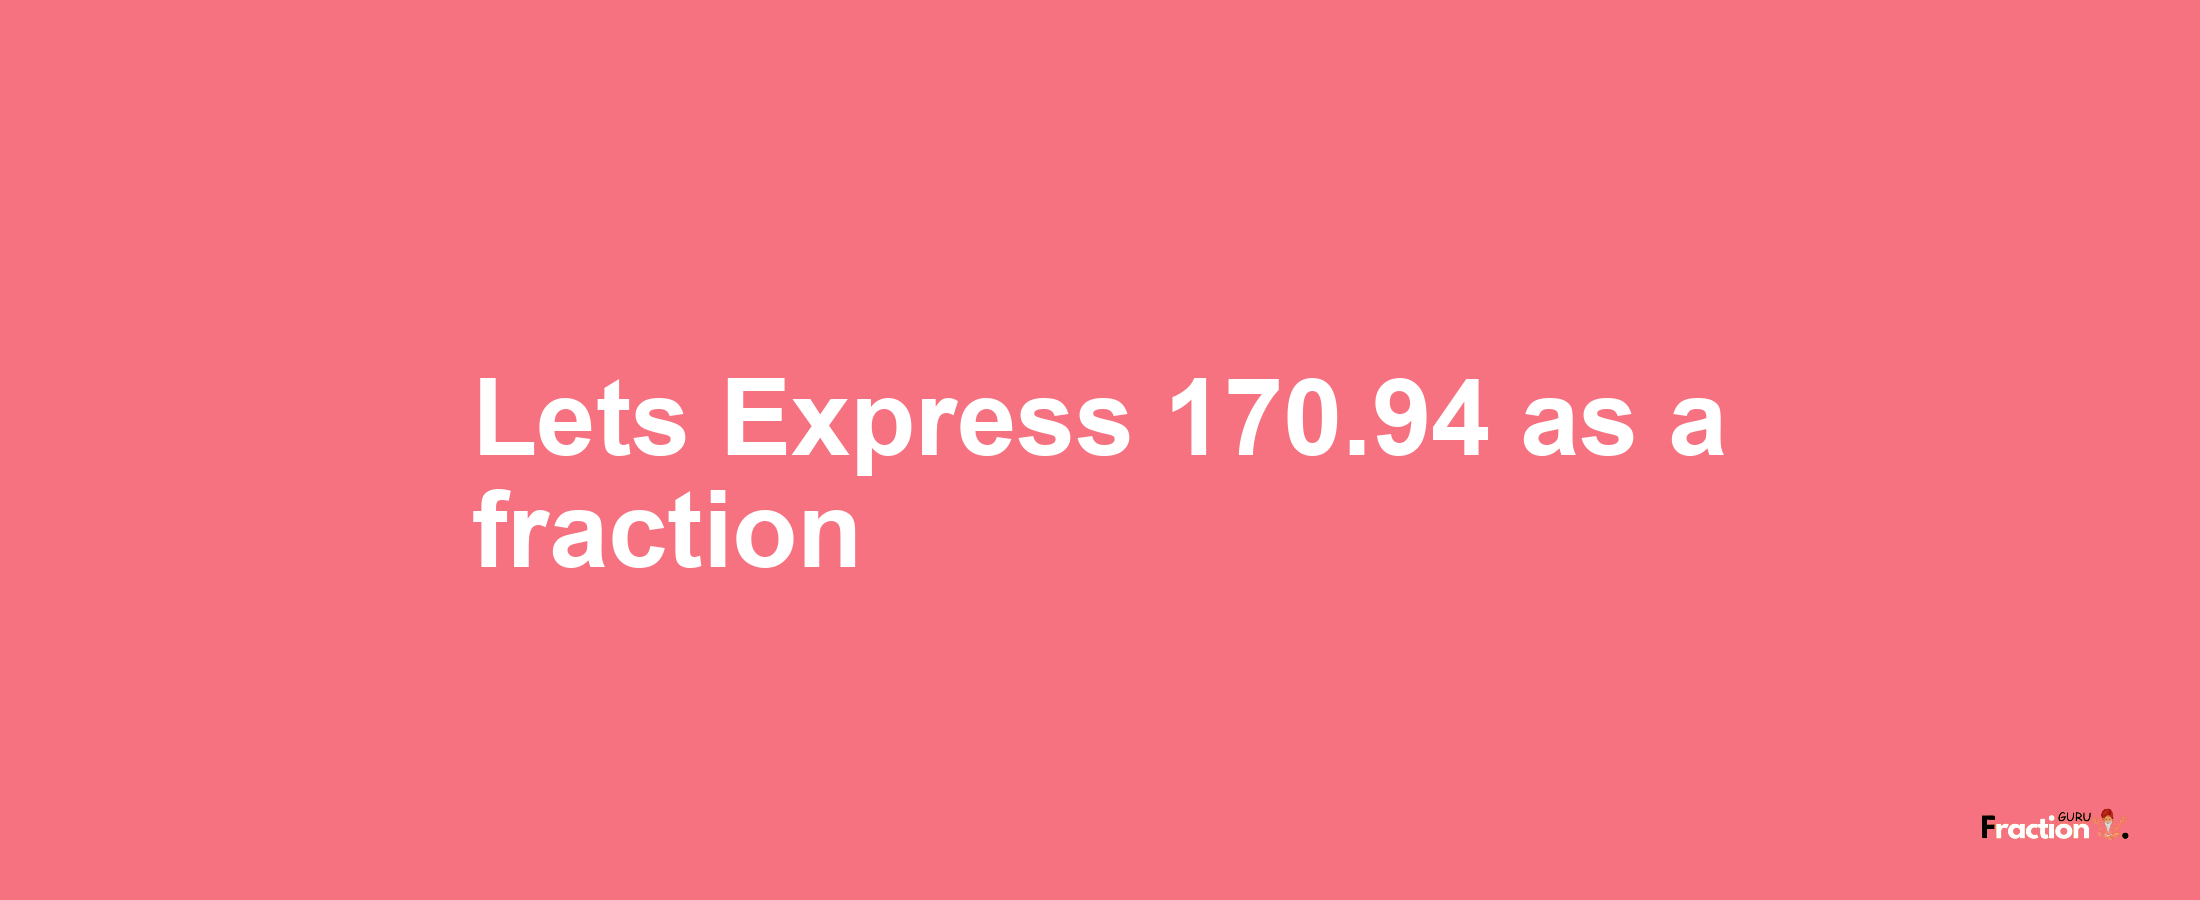 Lets Express 170.94 as afraction